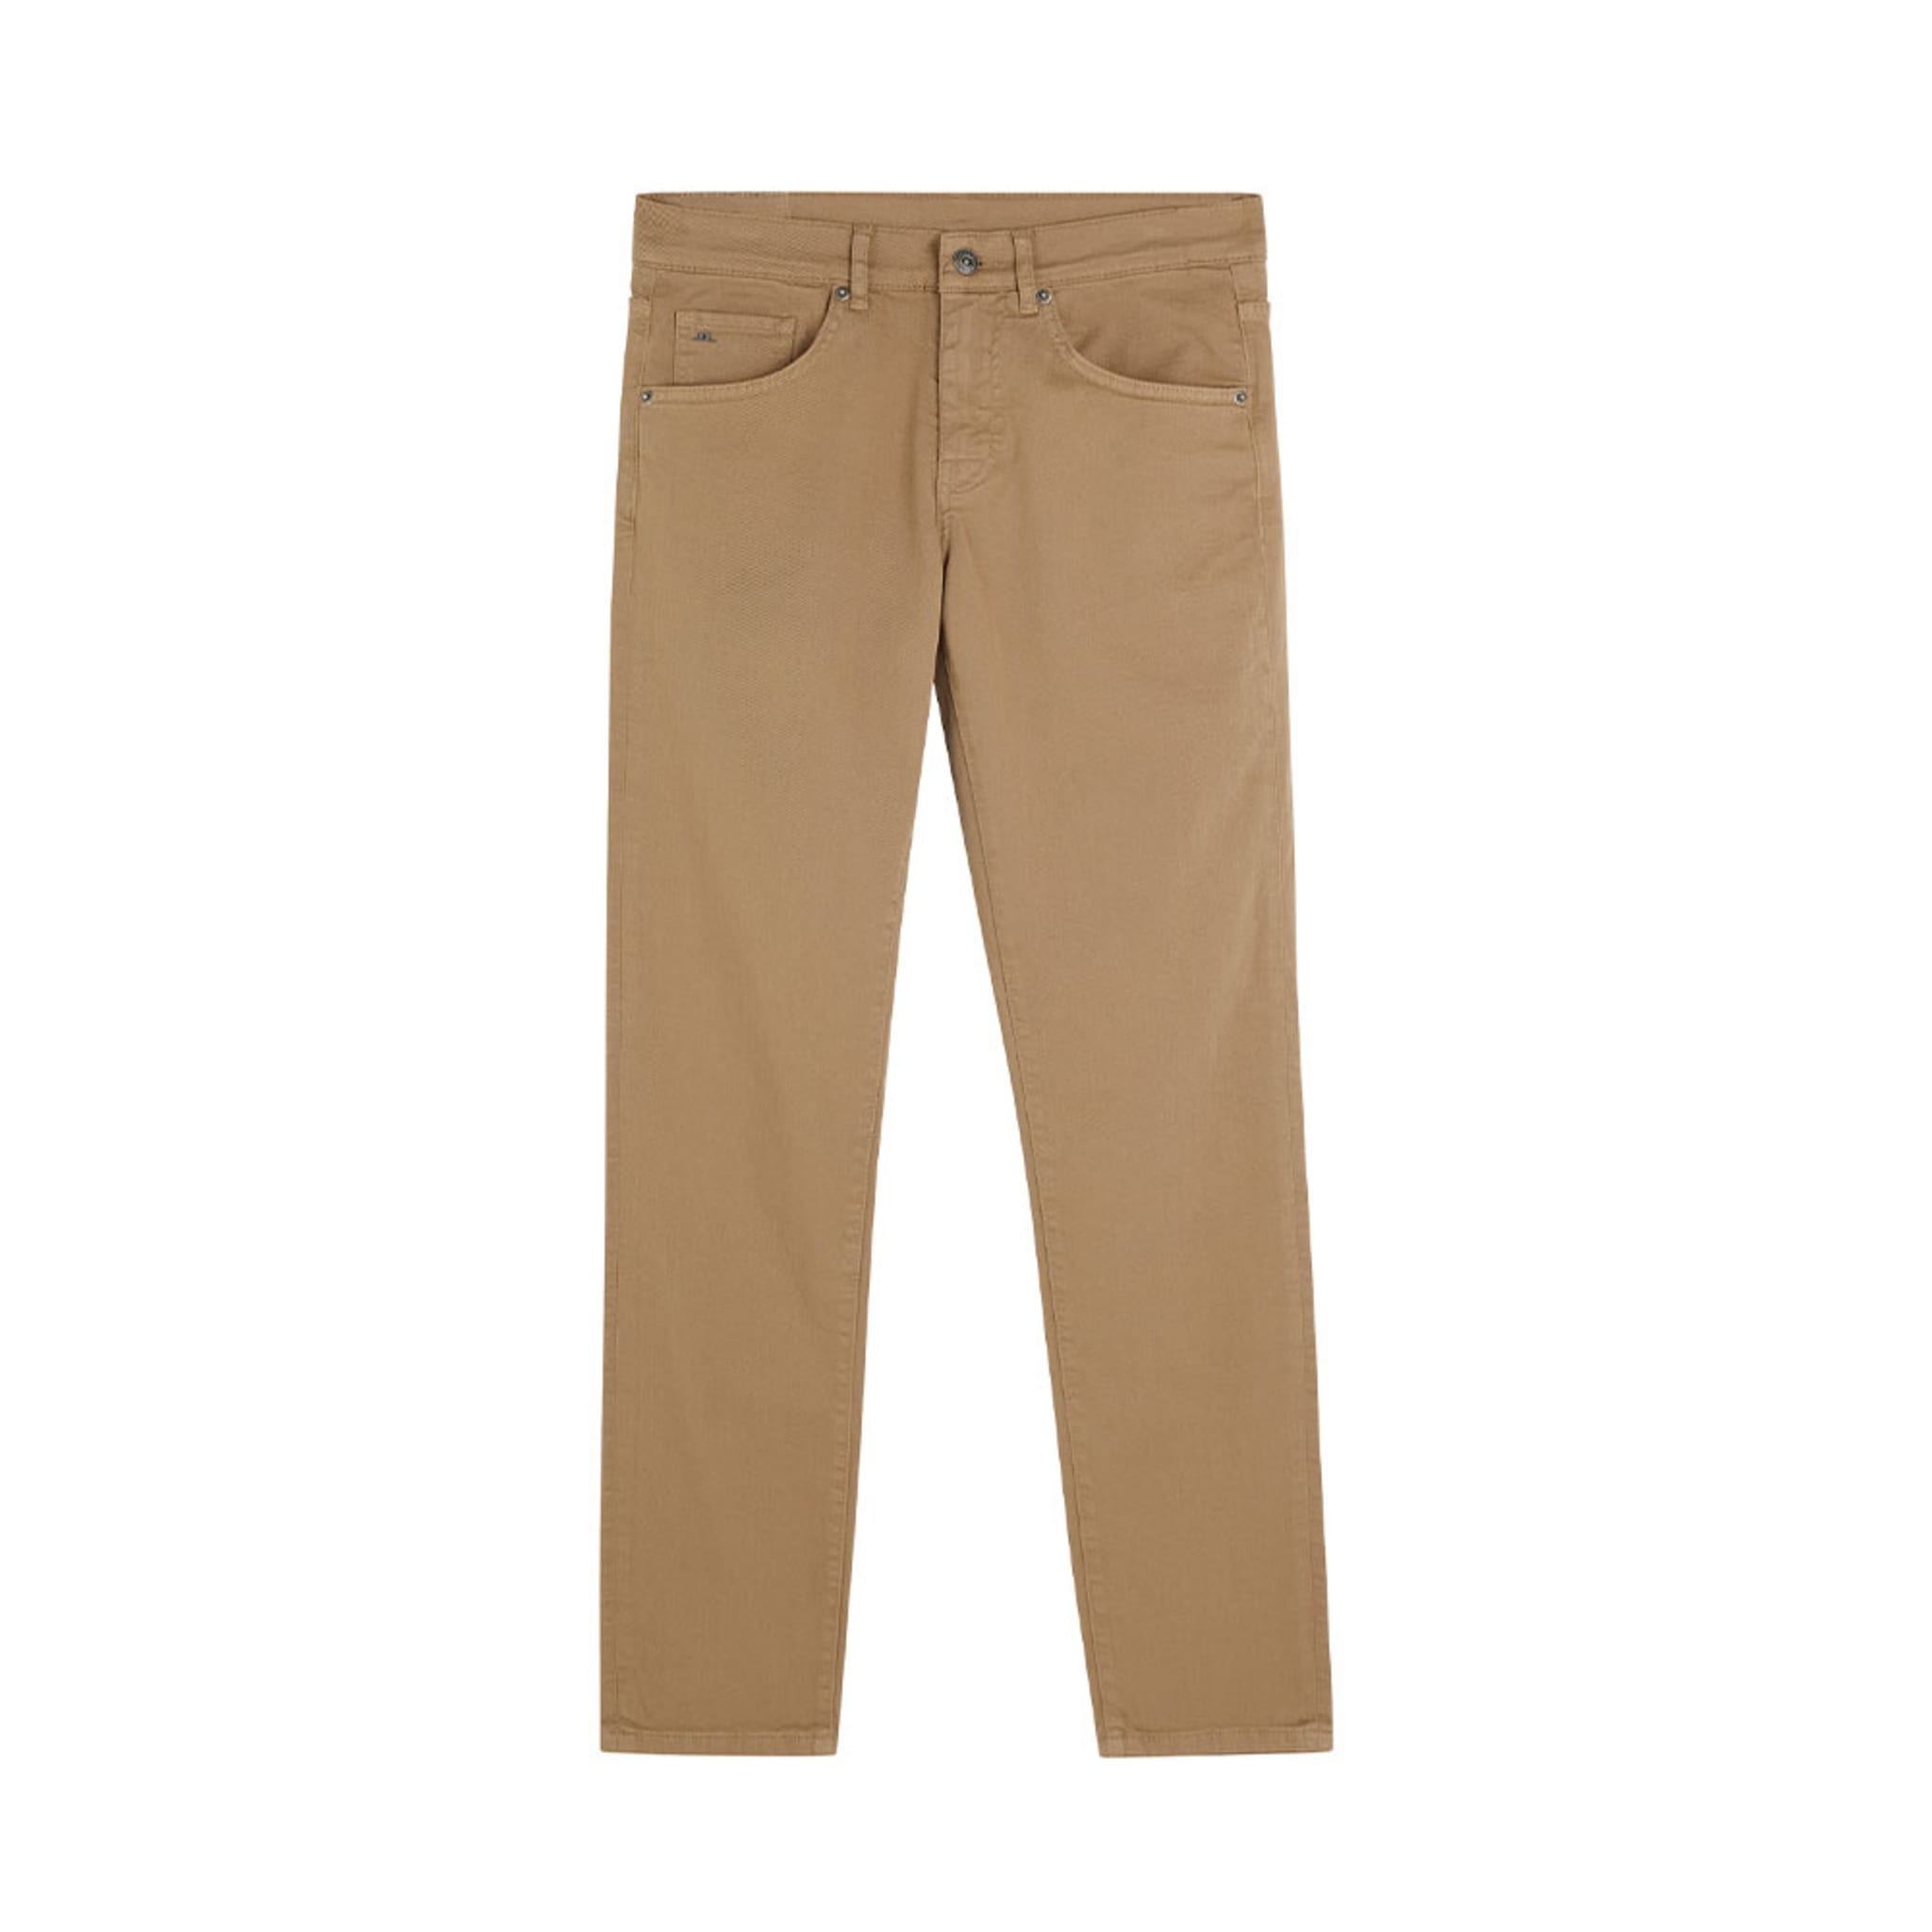 Jay Stretch LHT Jeans, Tiger Brown